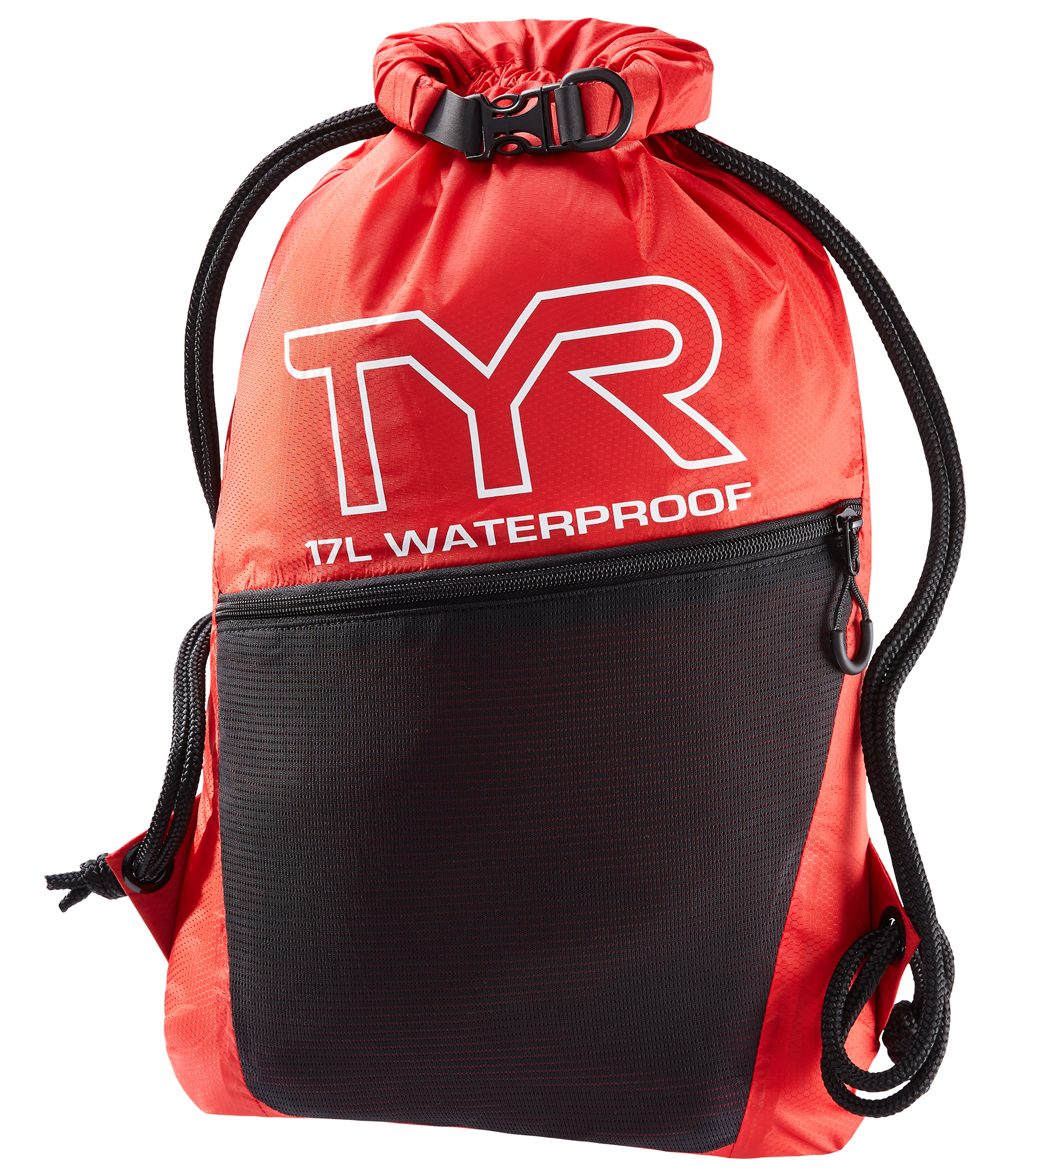 TYR Alliance Waterproof Draw String Sack Pack - Red Nylon - Swimoutlet.com